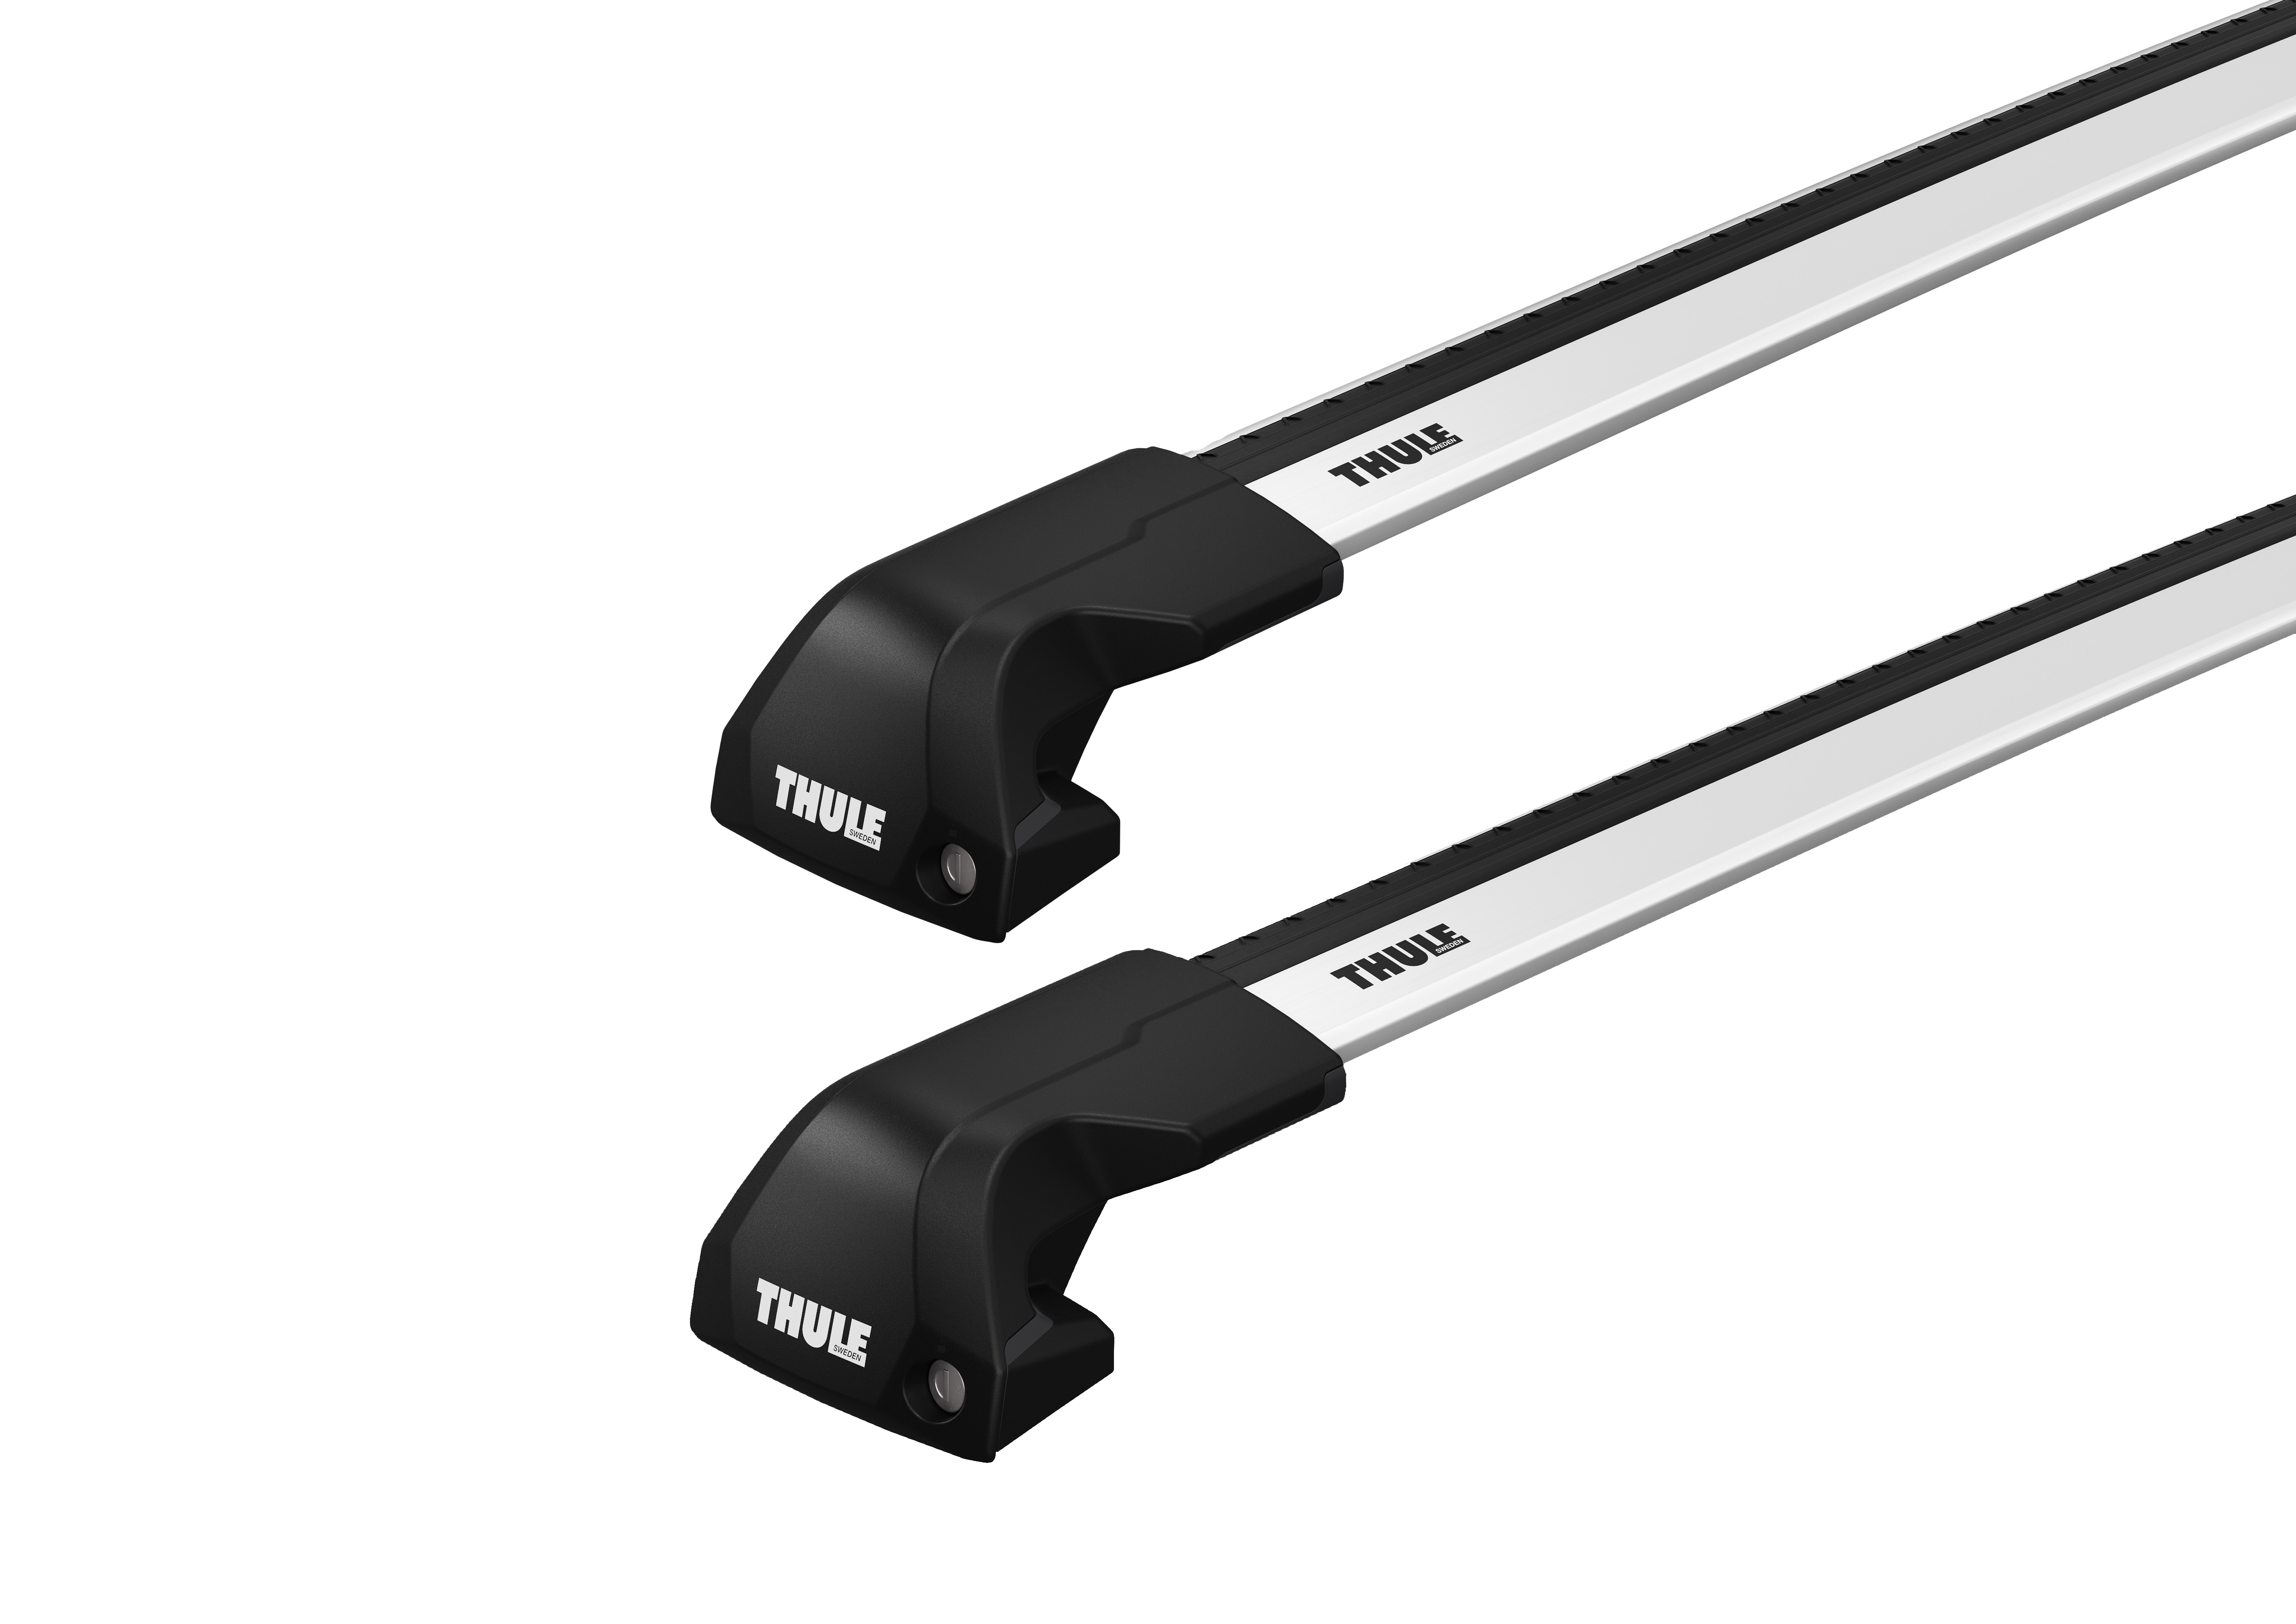 Thule WingBar Edge Silver 2 Bar Roof Rack for BMW 3 Series F31 5dr Wagon with Flush Roof Rail (2012 to 2019) - Flush Rail Mount